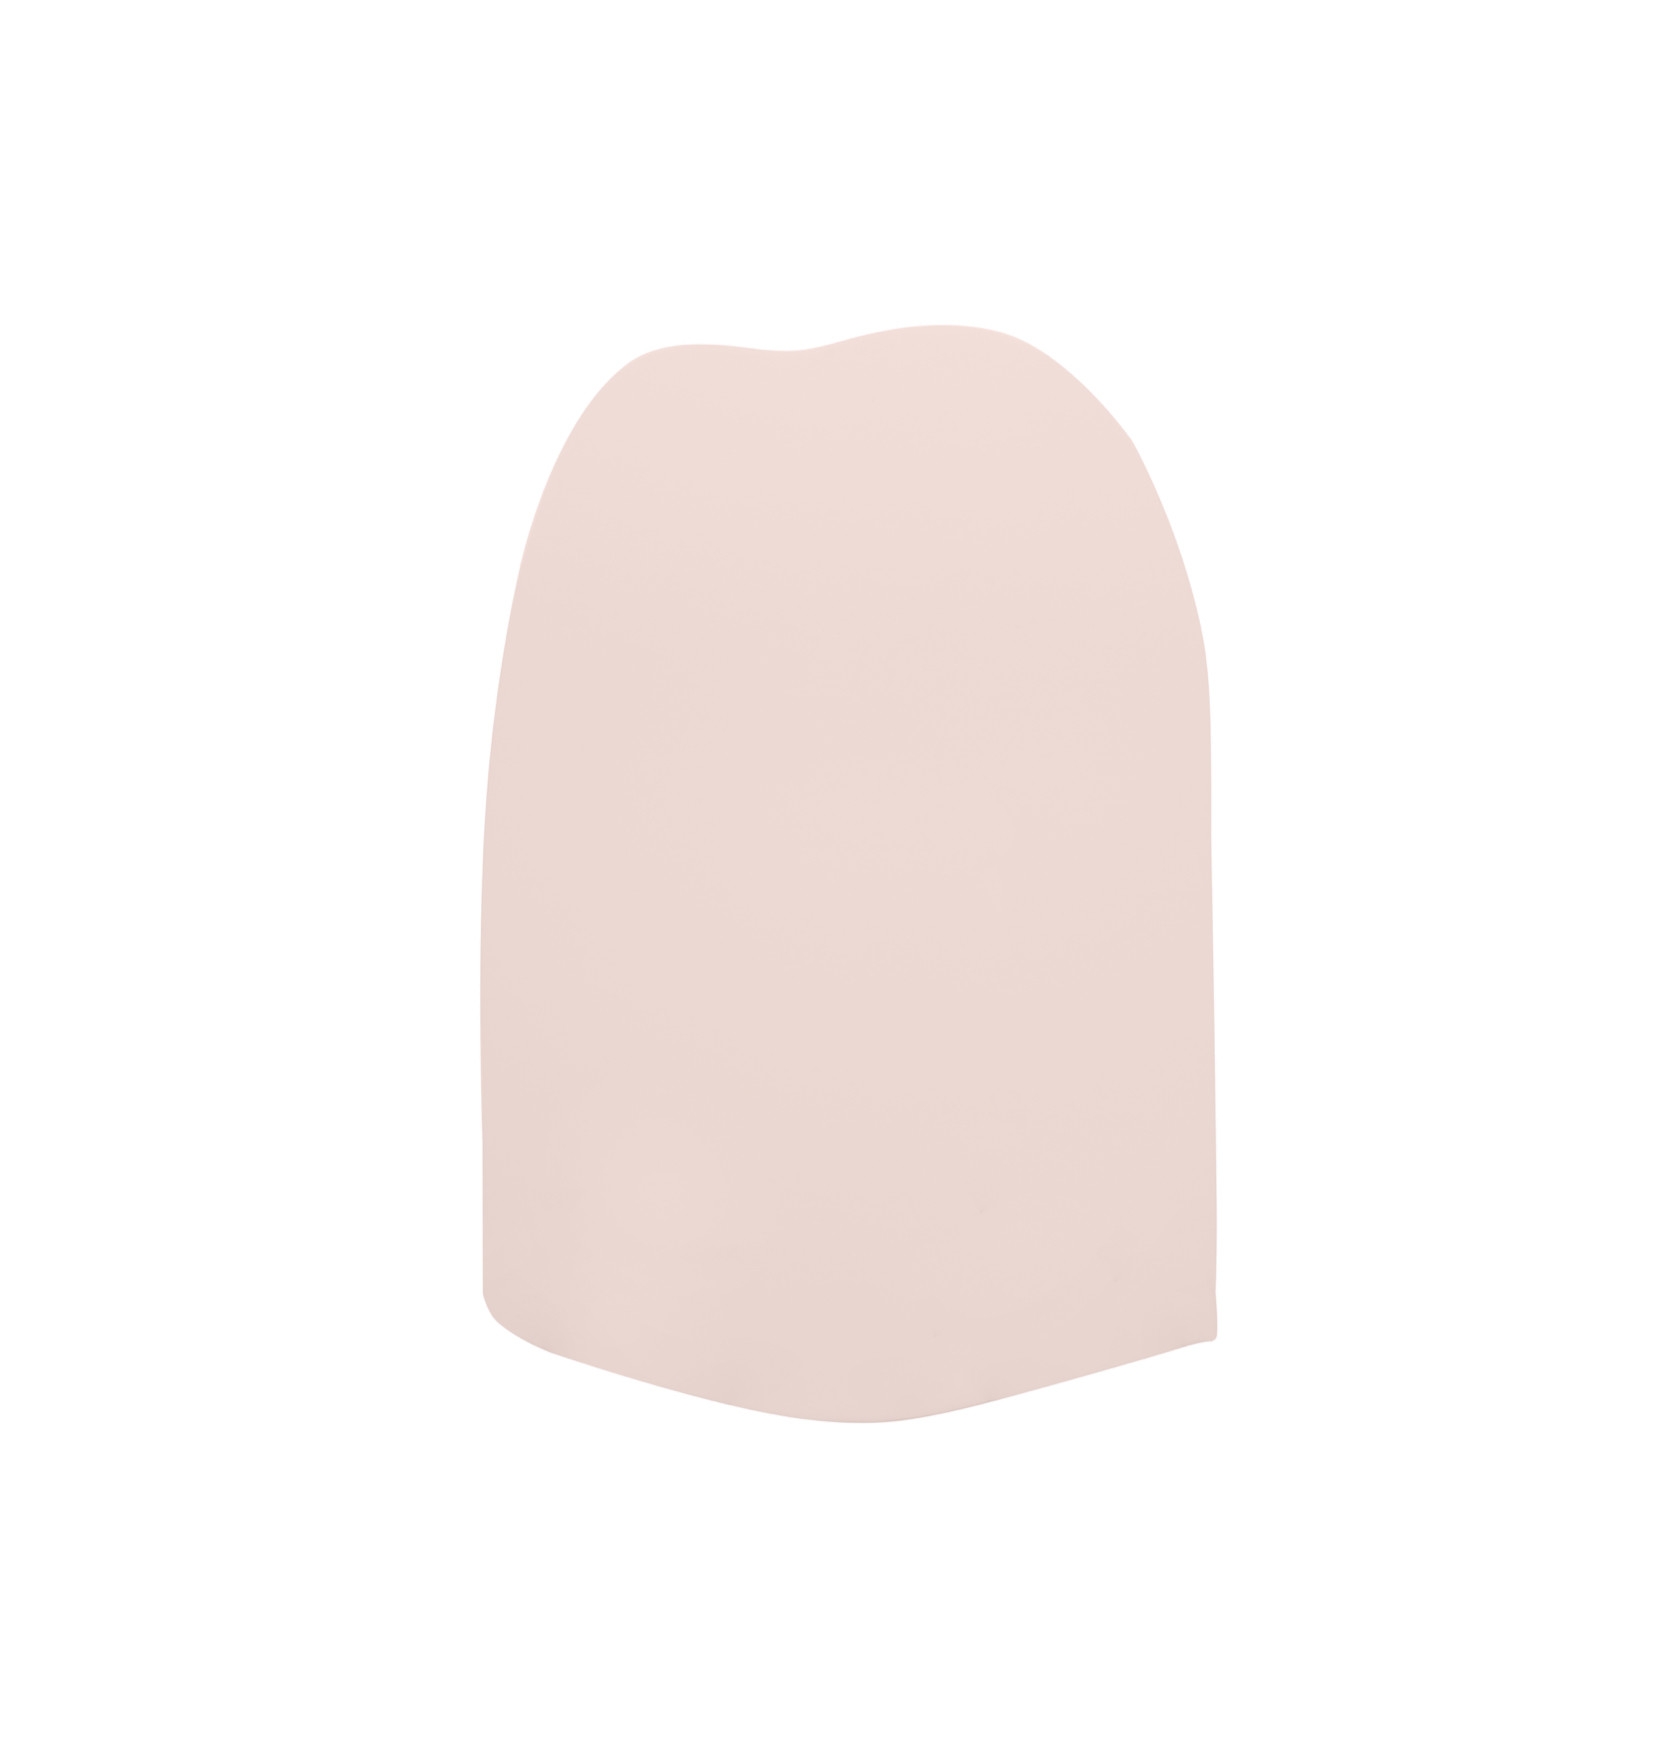 Clare Paint - Baby Soft - Wall Swatch - Image 1